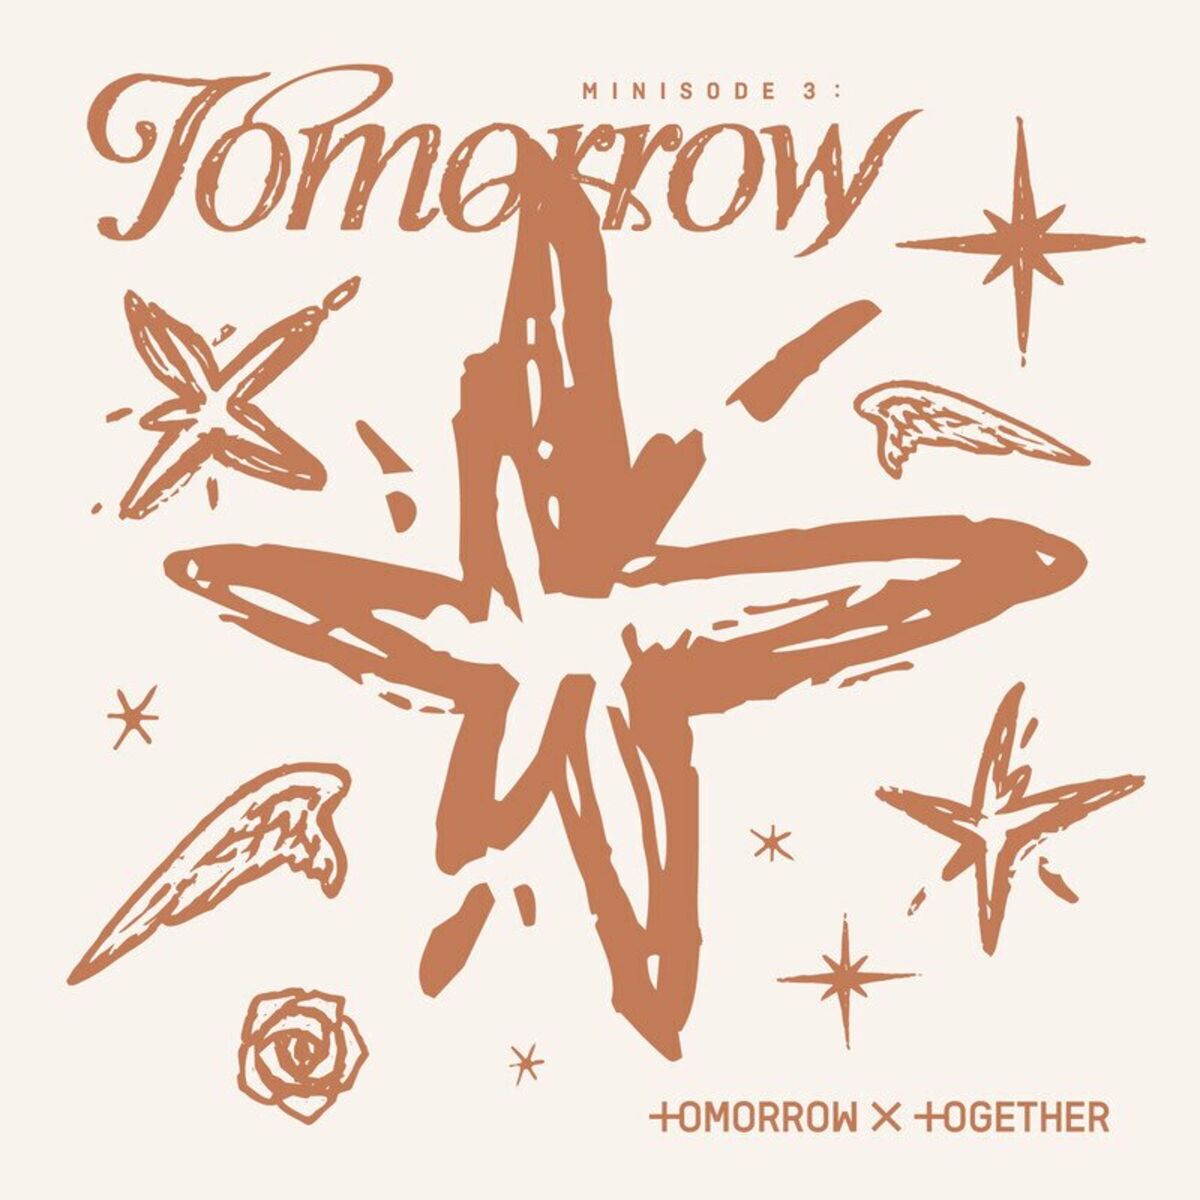 TXT (TOMORROW X TOGETHER) – minisode 3: TOMORROW with Remixes